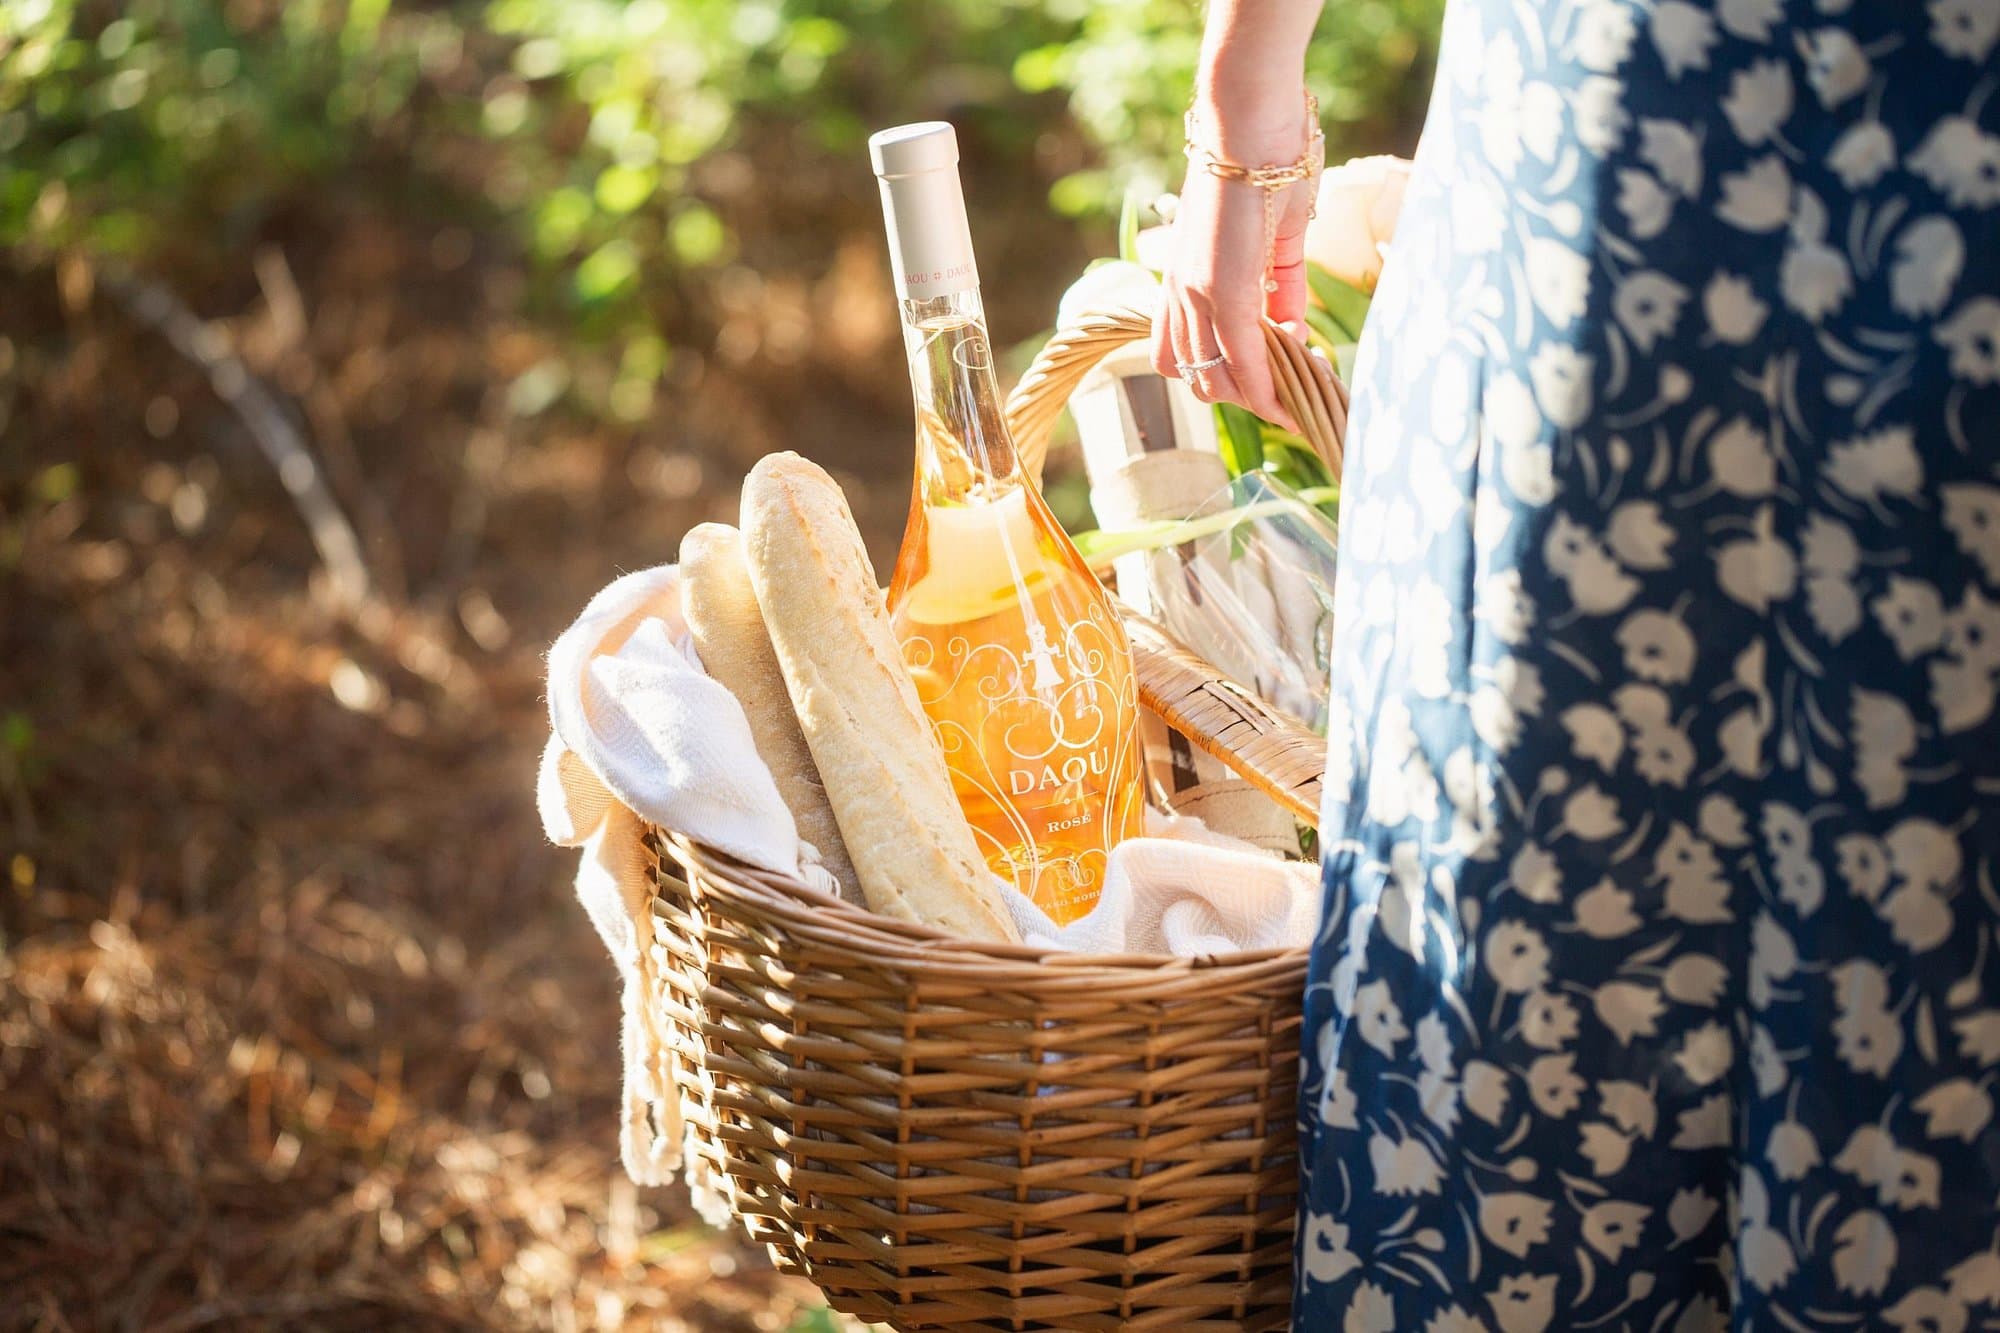 A woman carries a picnic basket with loaves of baguette and a bottle of DAOU rosé